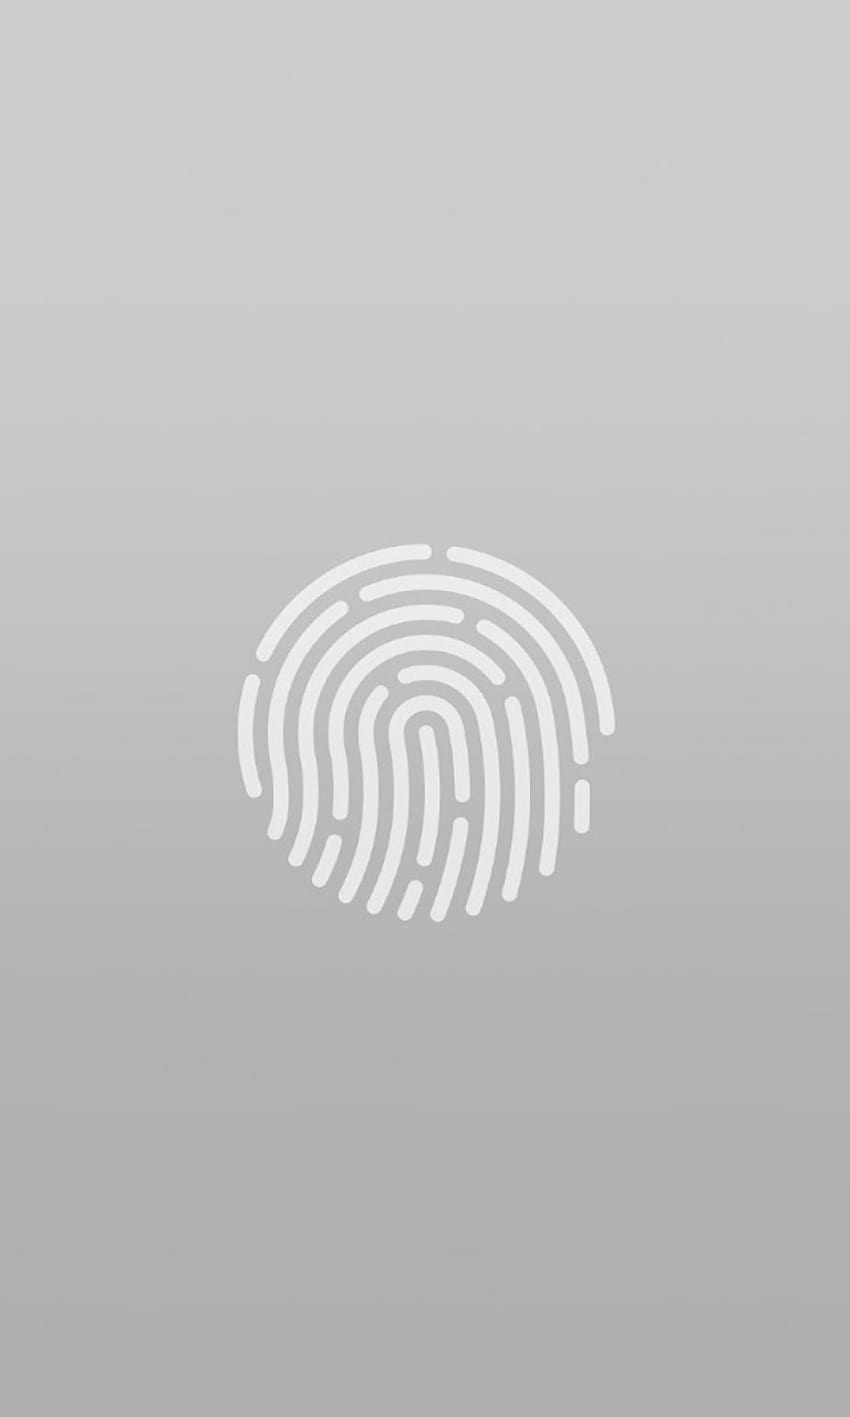 Android Best : Gray Touch ID Fingerprint Sensor Android Best HD phone wallpaper